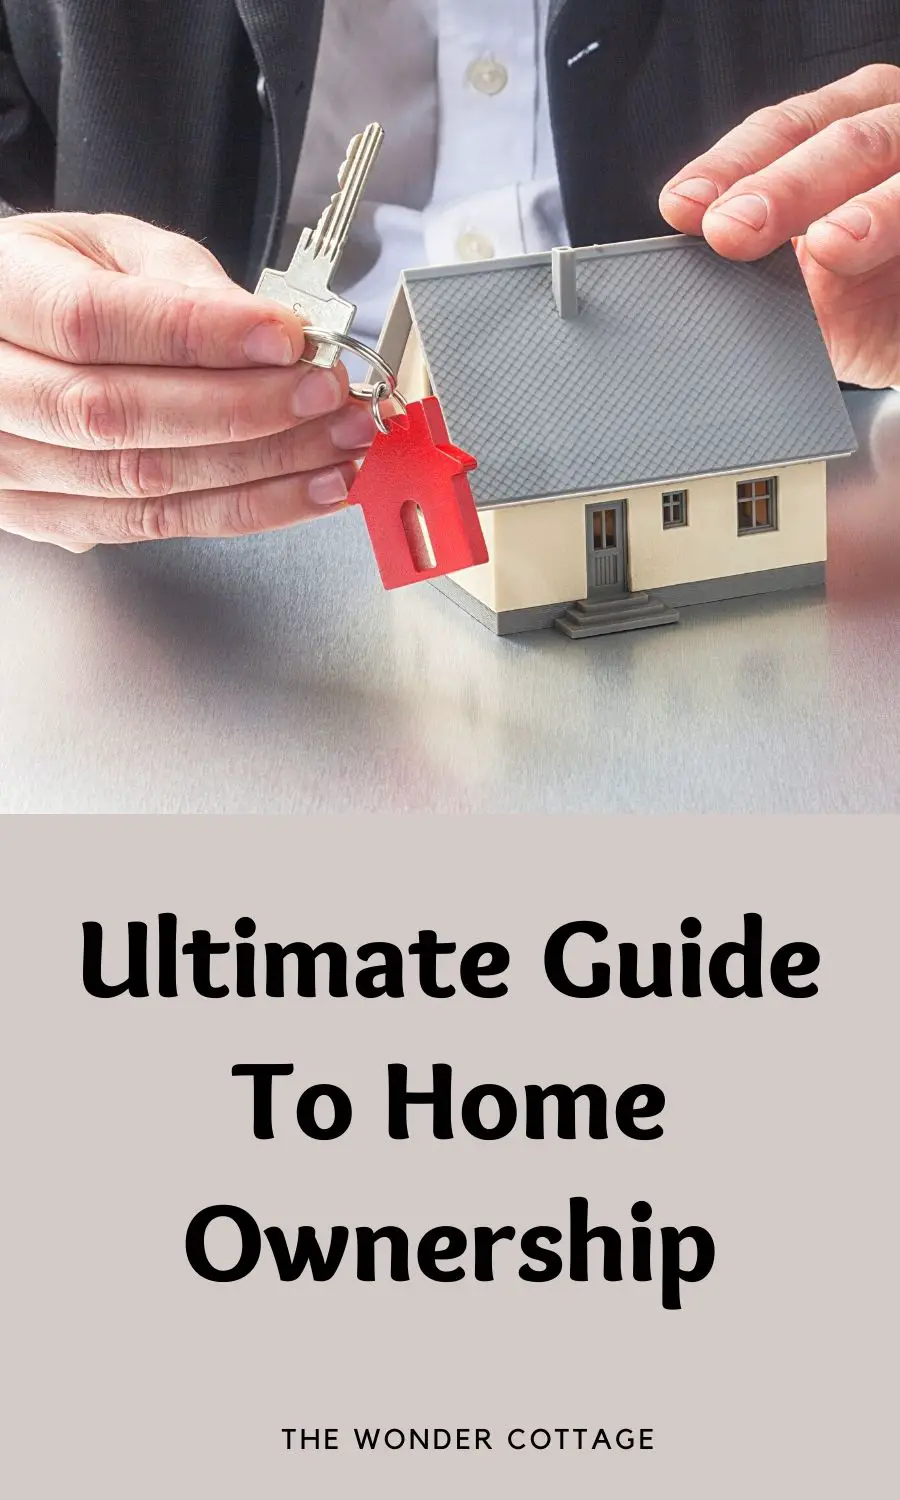 Ultimate Guide To Home Ownership